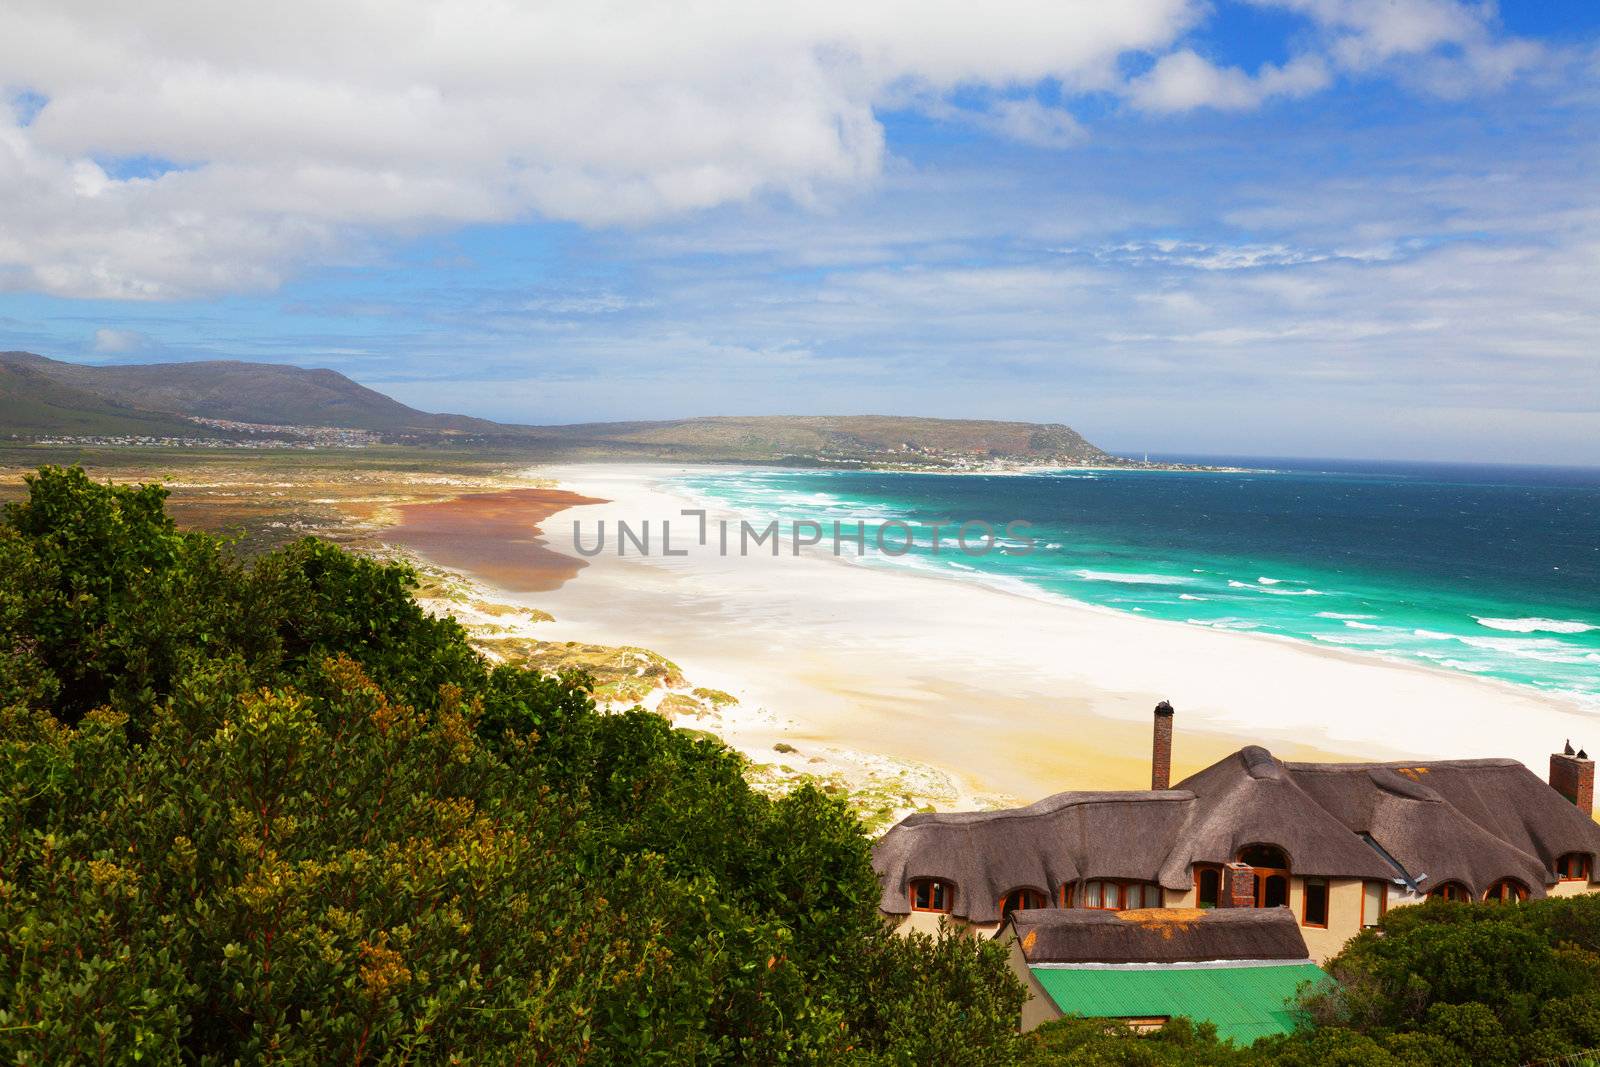 Marvellous beach and lonely house in South Africa - horizontal